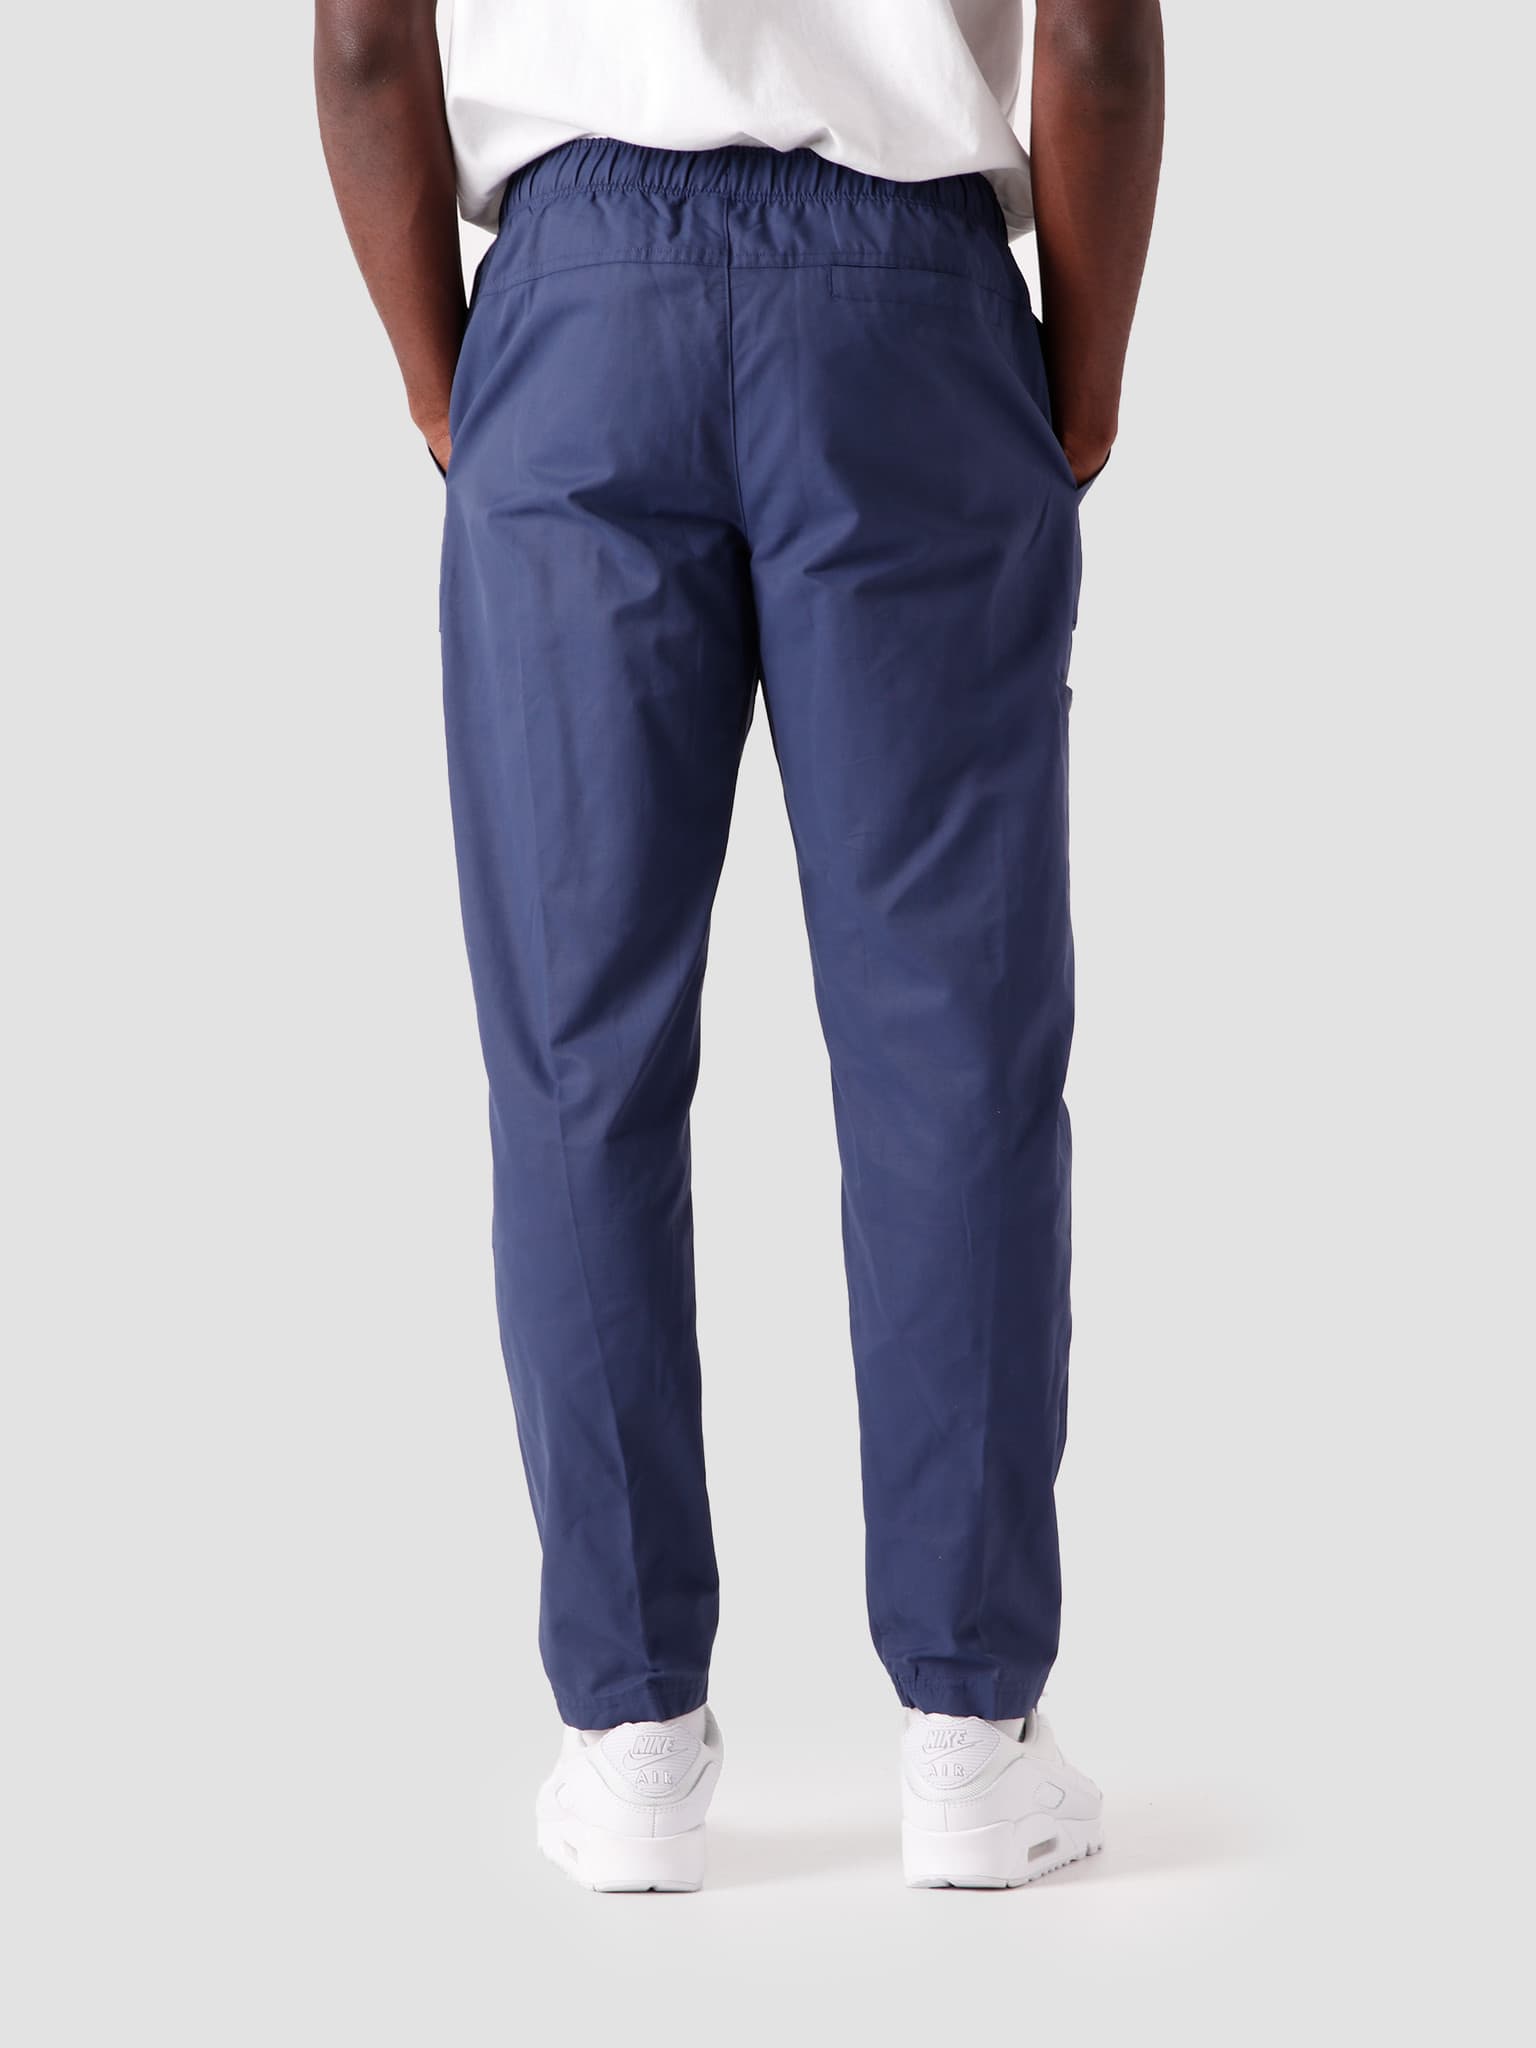 NSW Ce Woven Pant Players Midnight Navy White CZ9927-410